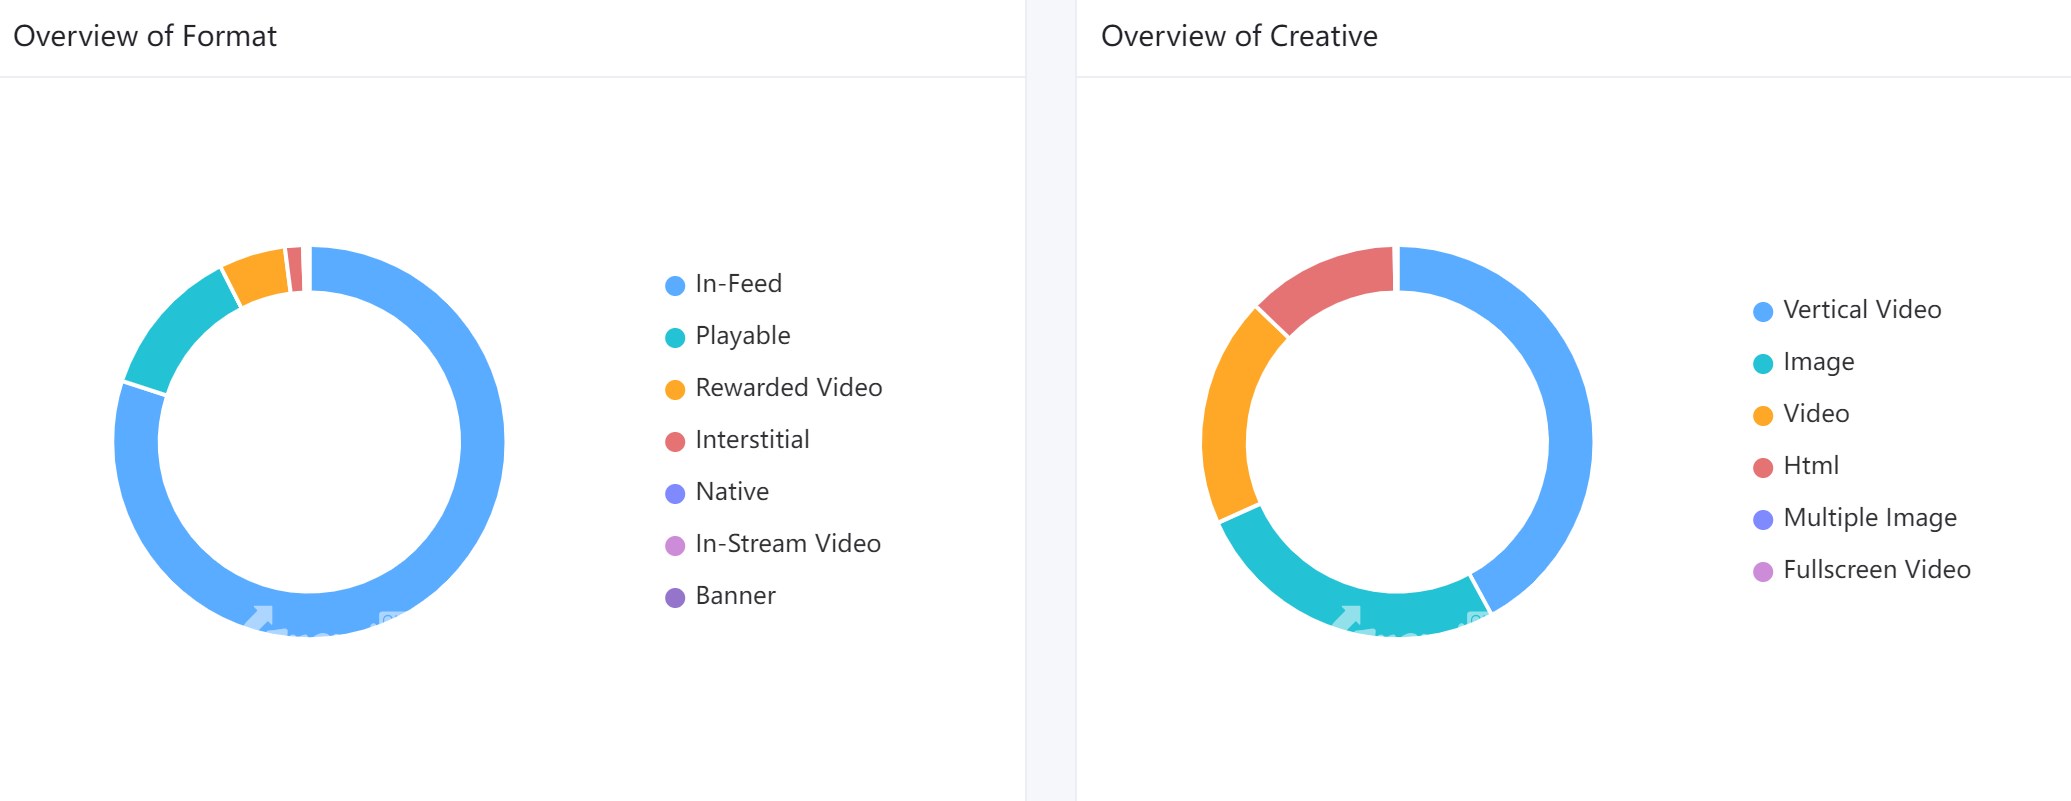 Around 80.01% of Gardenscapes' ads were in the form of in-feed ads and mainly vertical videos.